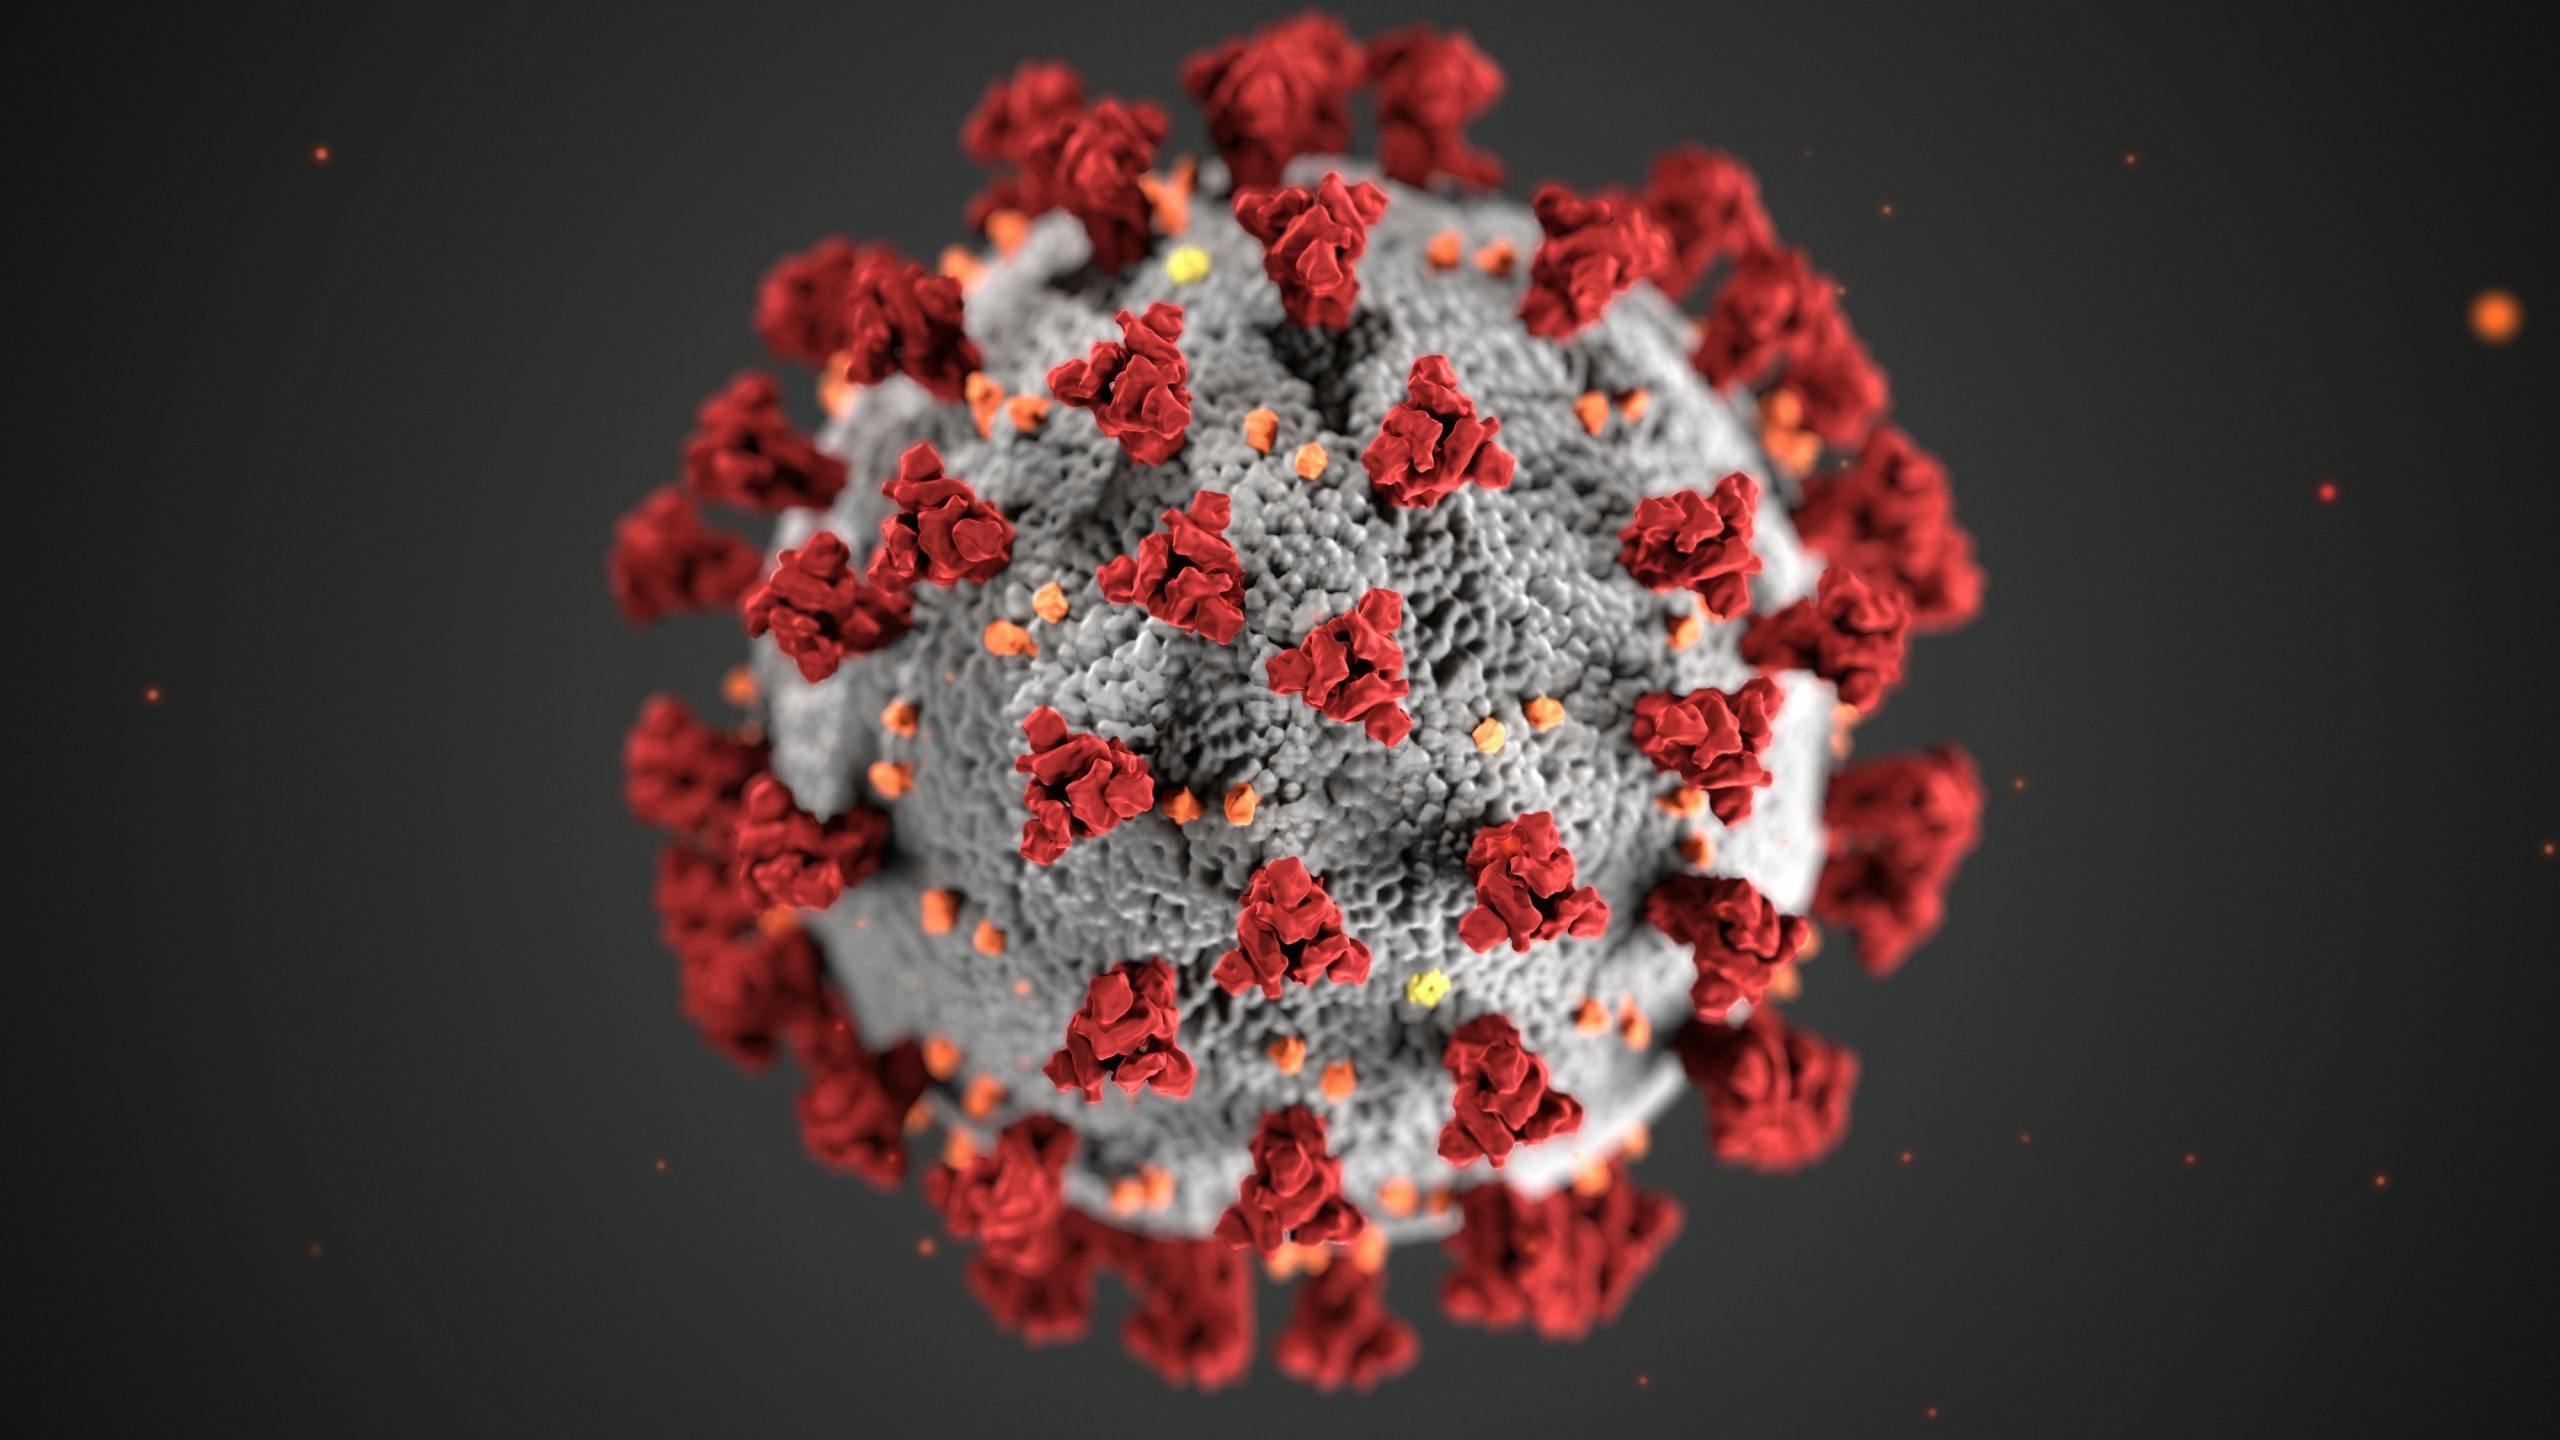 Illustration of the COVID-19 virus. The image shows a grey spherical structure with red spikes around the surface of the sphere.